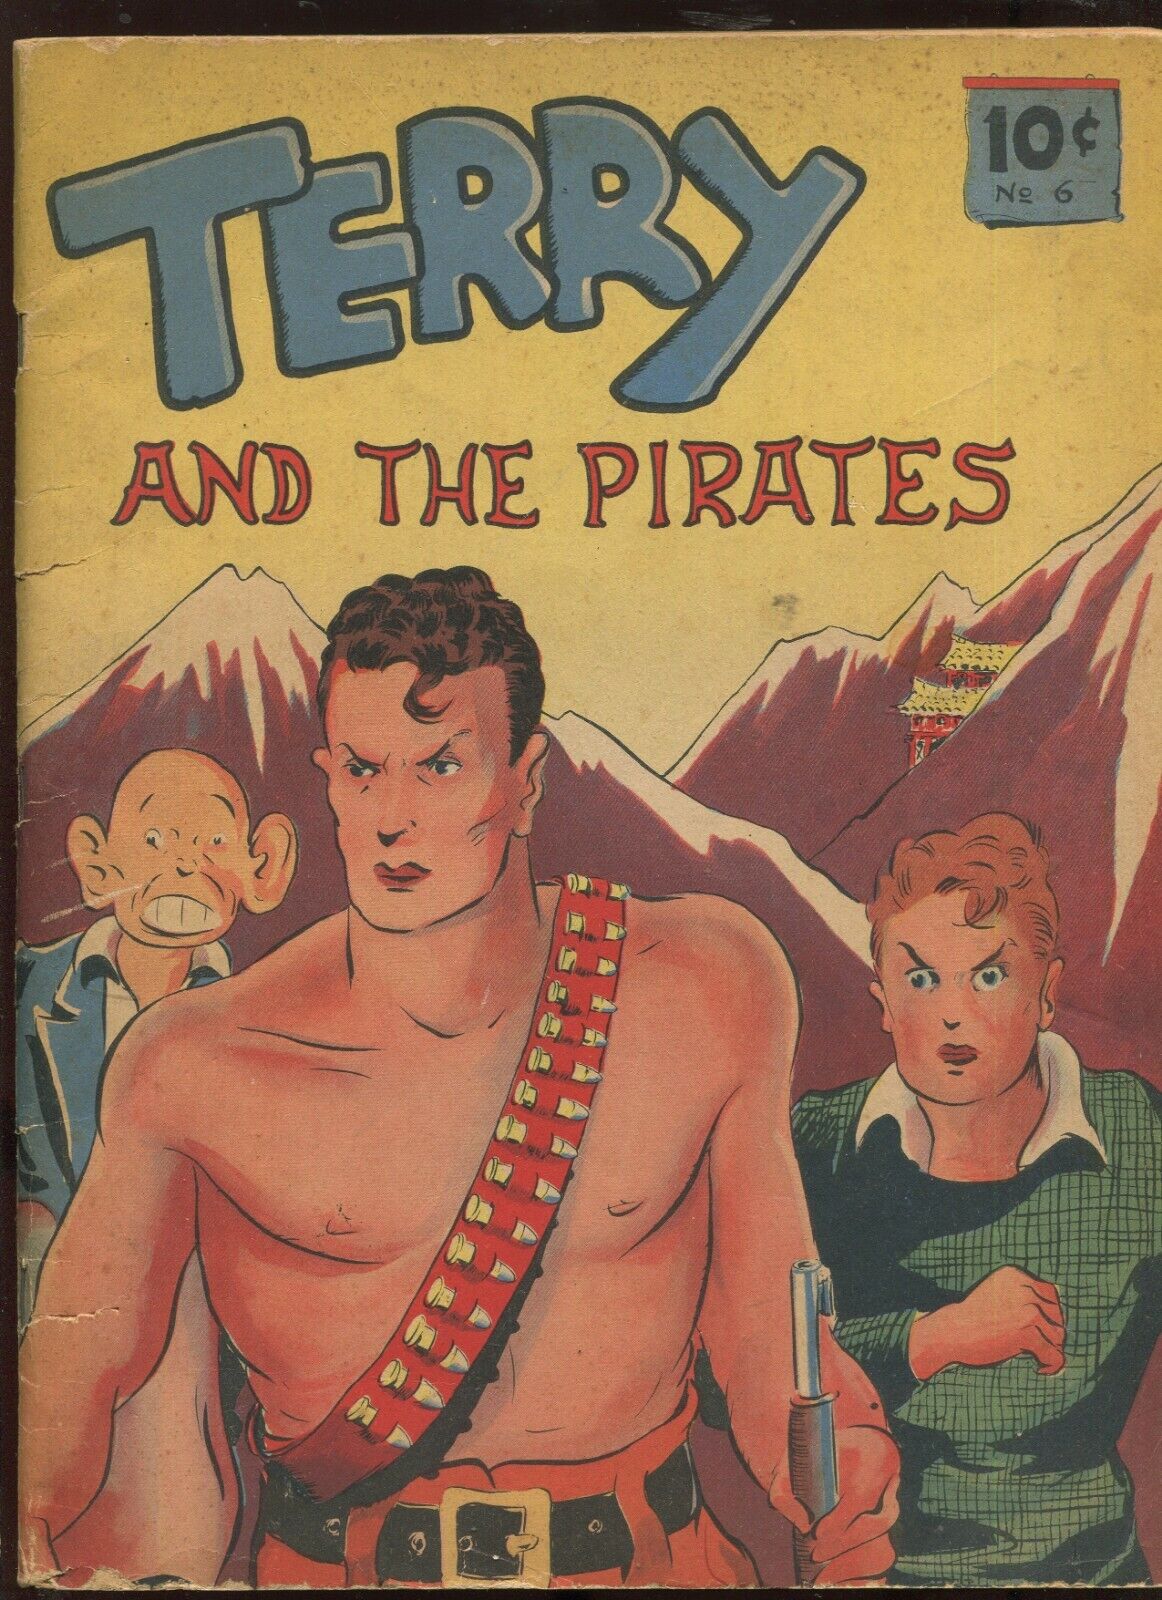 TERRY AND THE PIRATES #6 (4.5) DELL FEATURE BOOKS  HARD TO FIND GOLDEN AGE